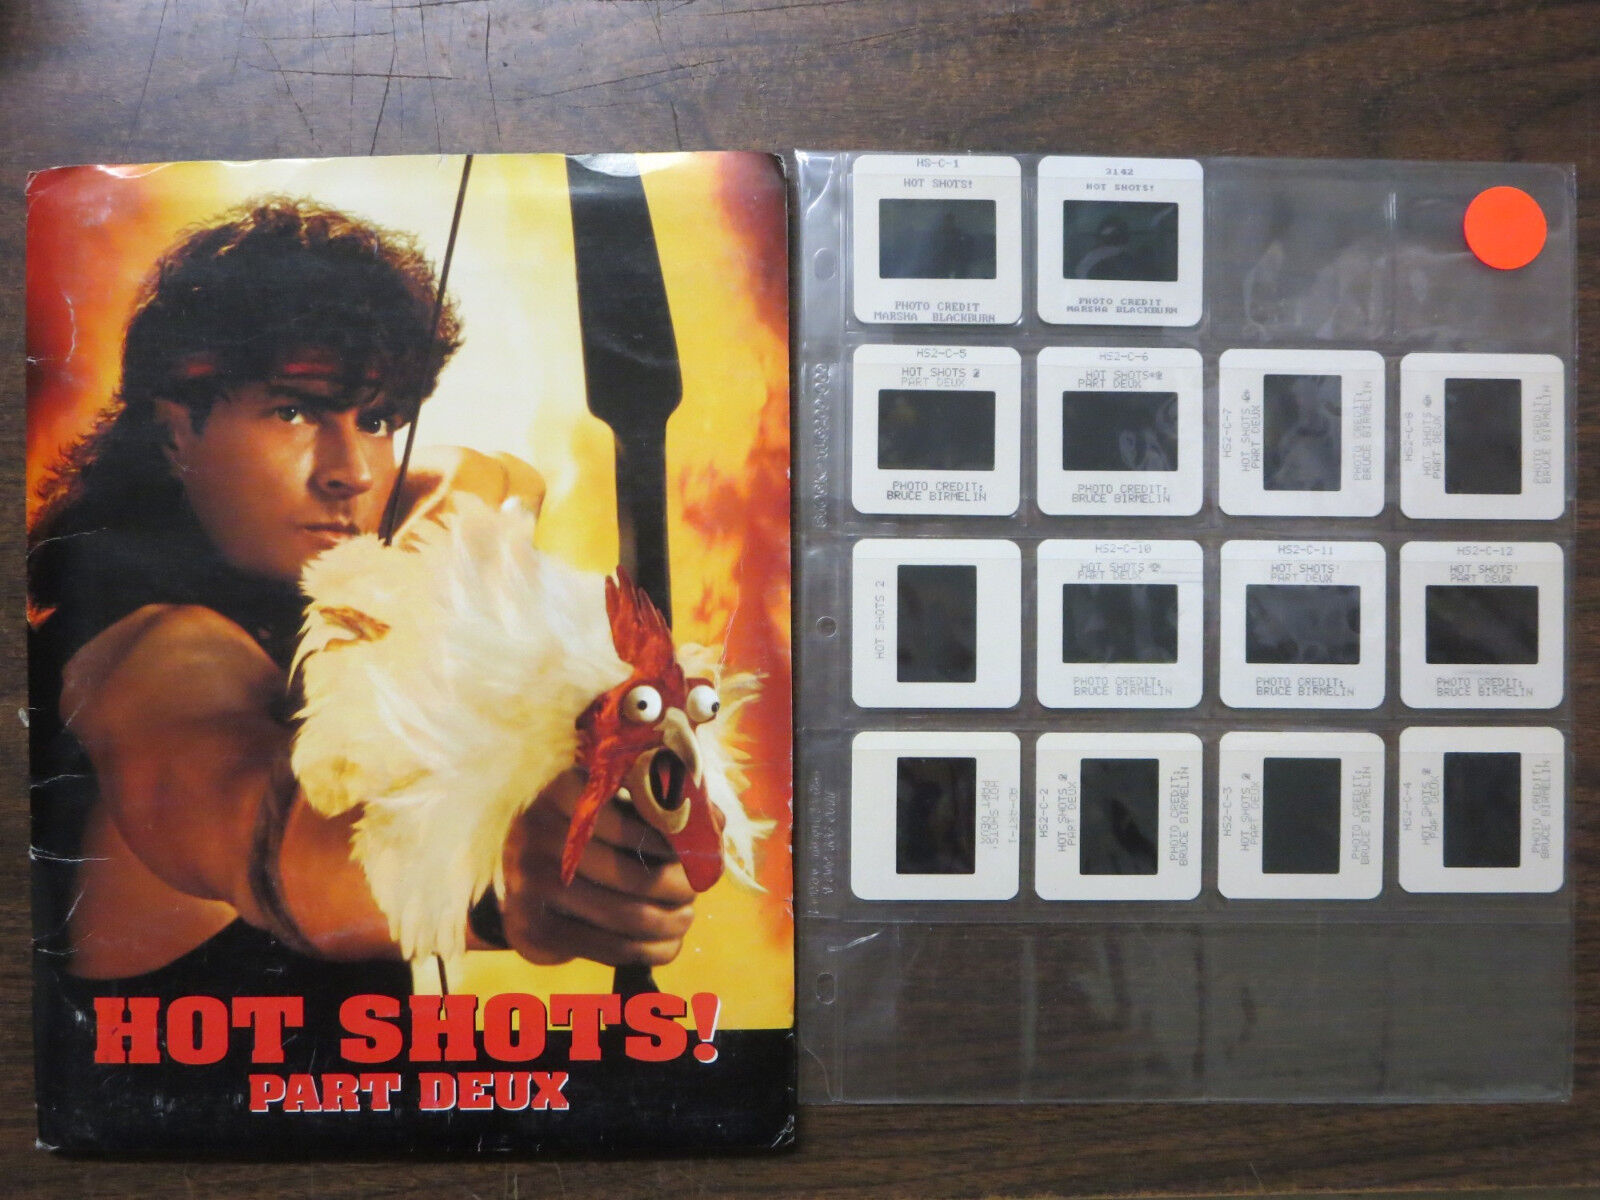 Hot Shots New sales Part Deux Press Kit with HS Both Slides 14 San Jose Mall movies from